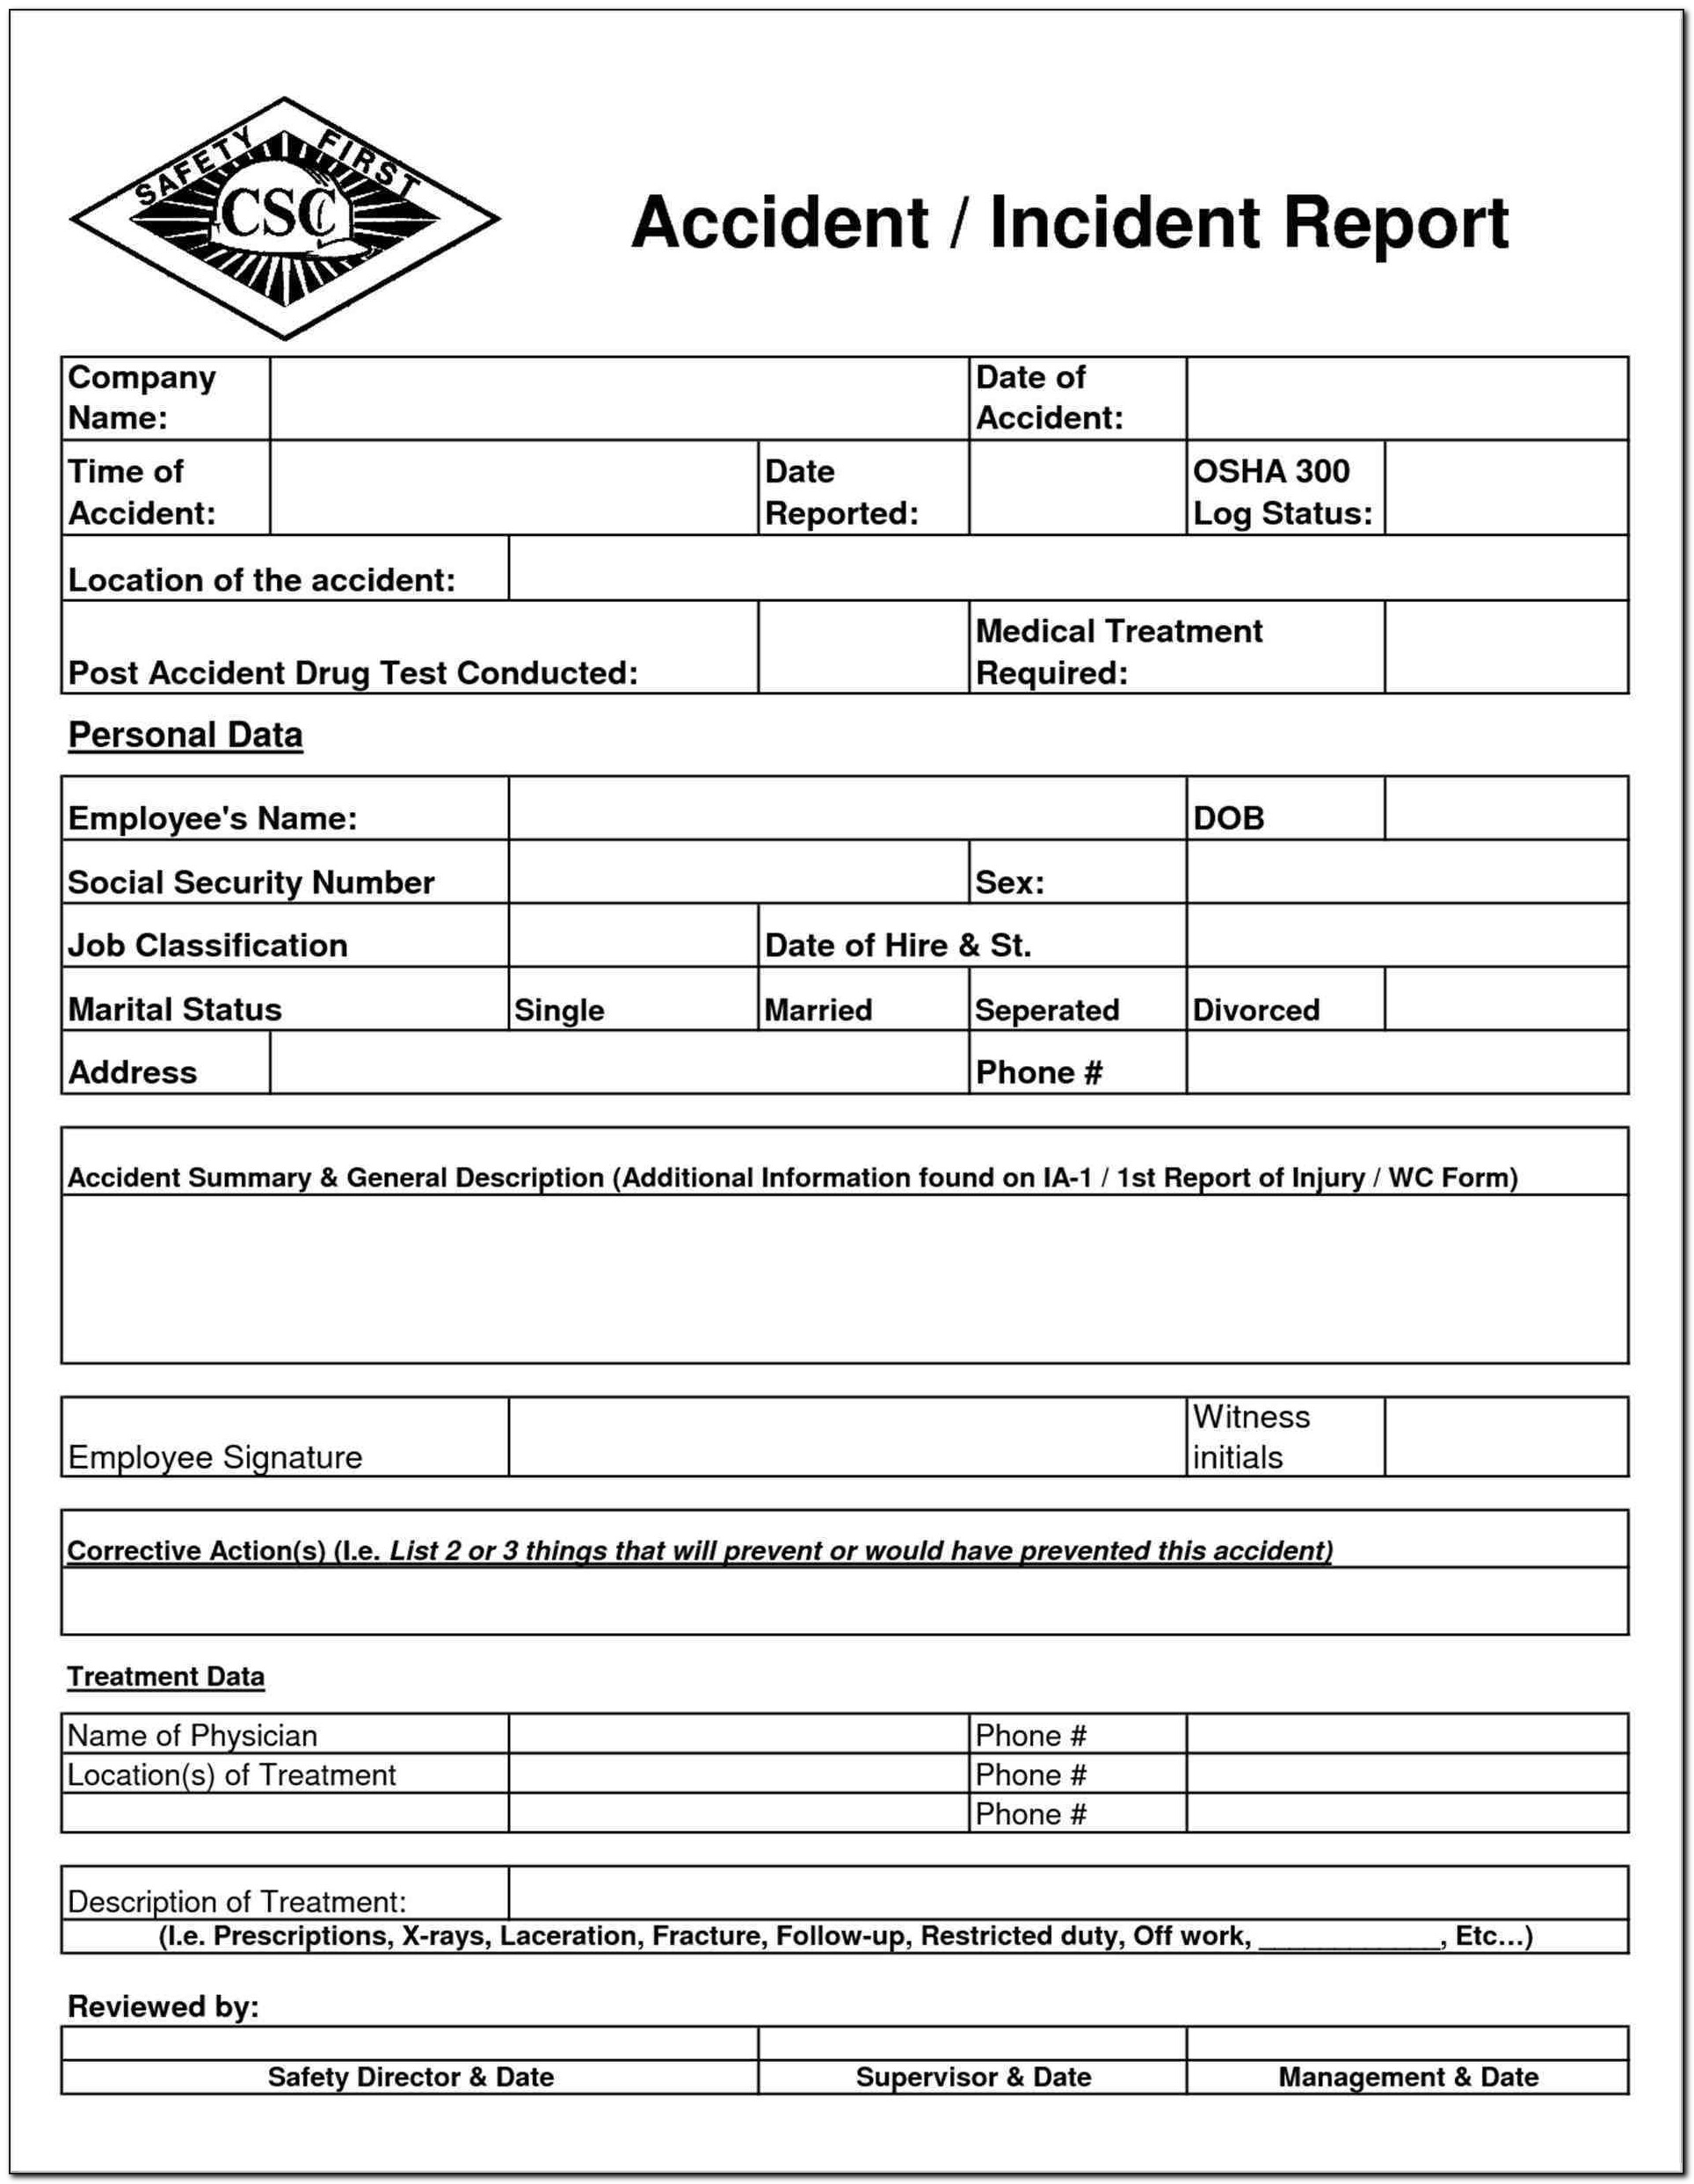 Tailgate Safety Meeting Form - Form : Resume Examples #Erkknqjon8 Regarding Health And Safety Incident Report Form Template